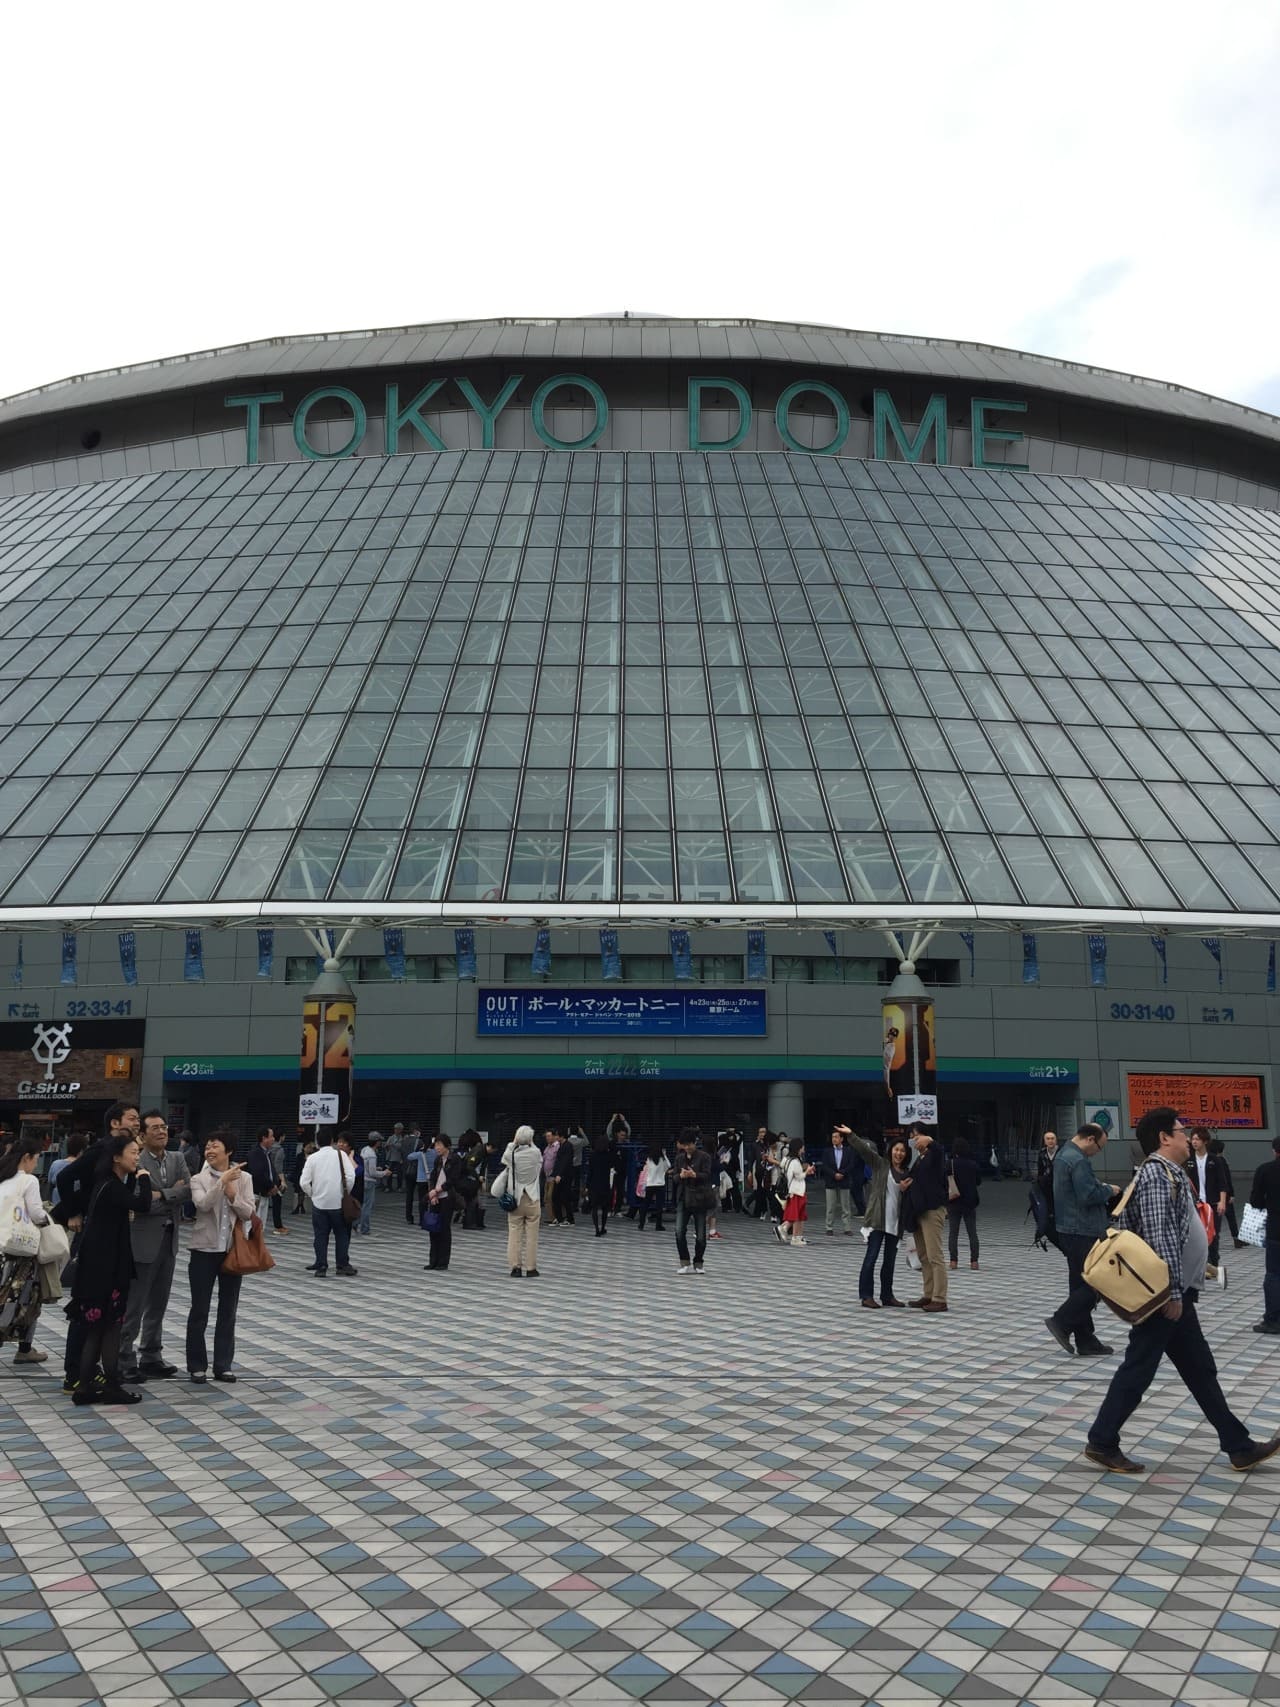 Paul McCartney Out There Japan Tour 2015